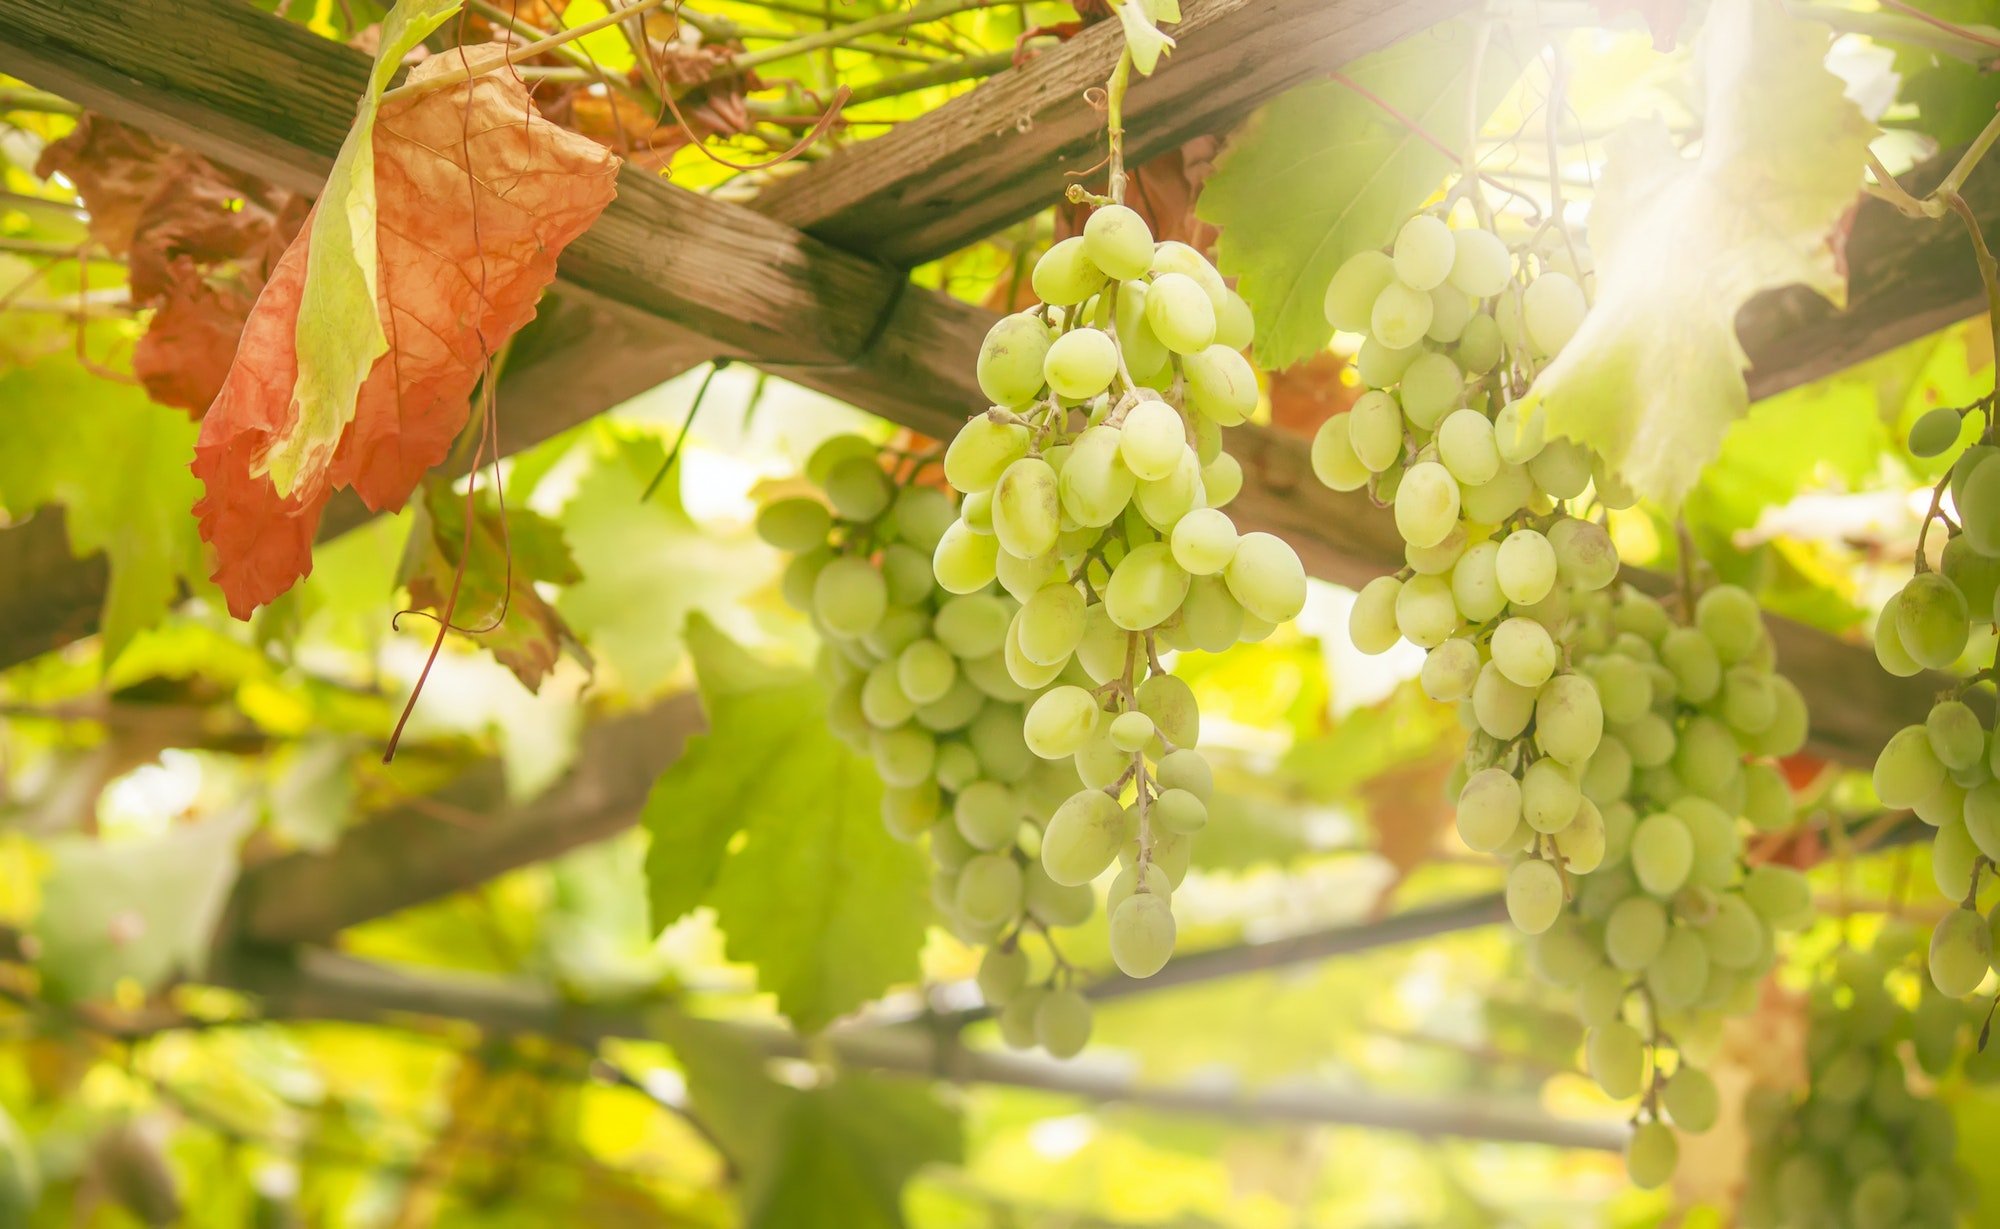 Green grapes on the vine, white wine variety in the vineyard, summer natural background